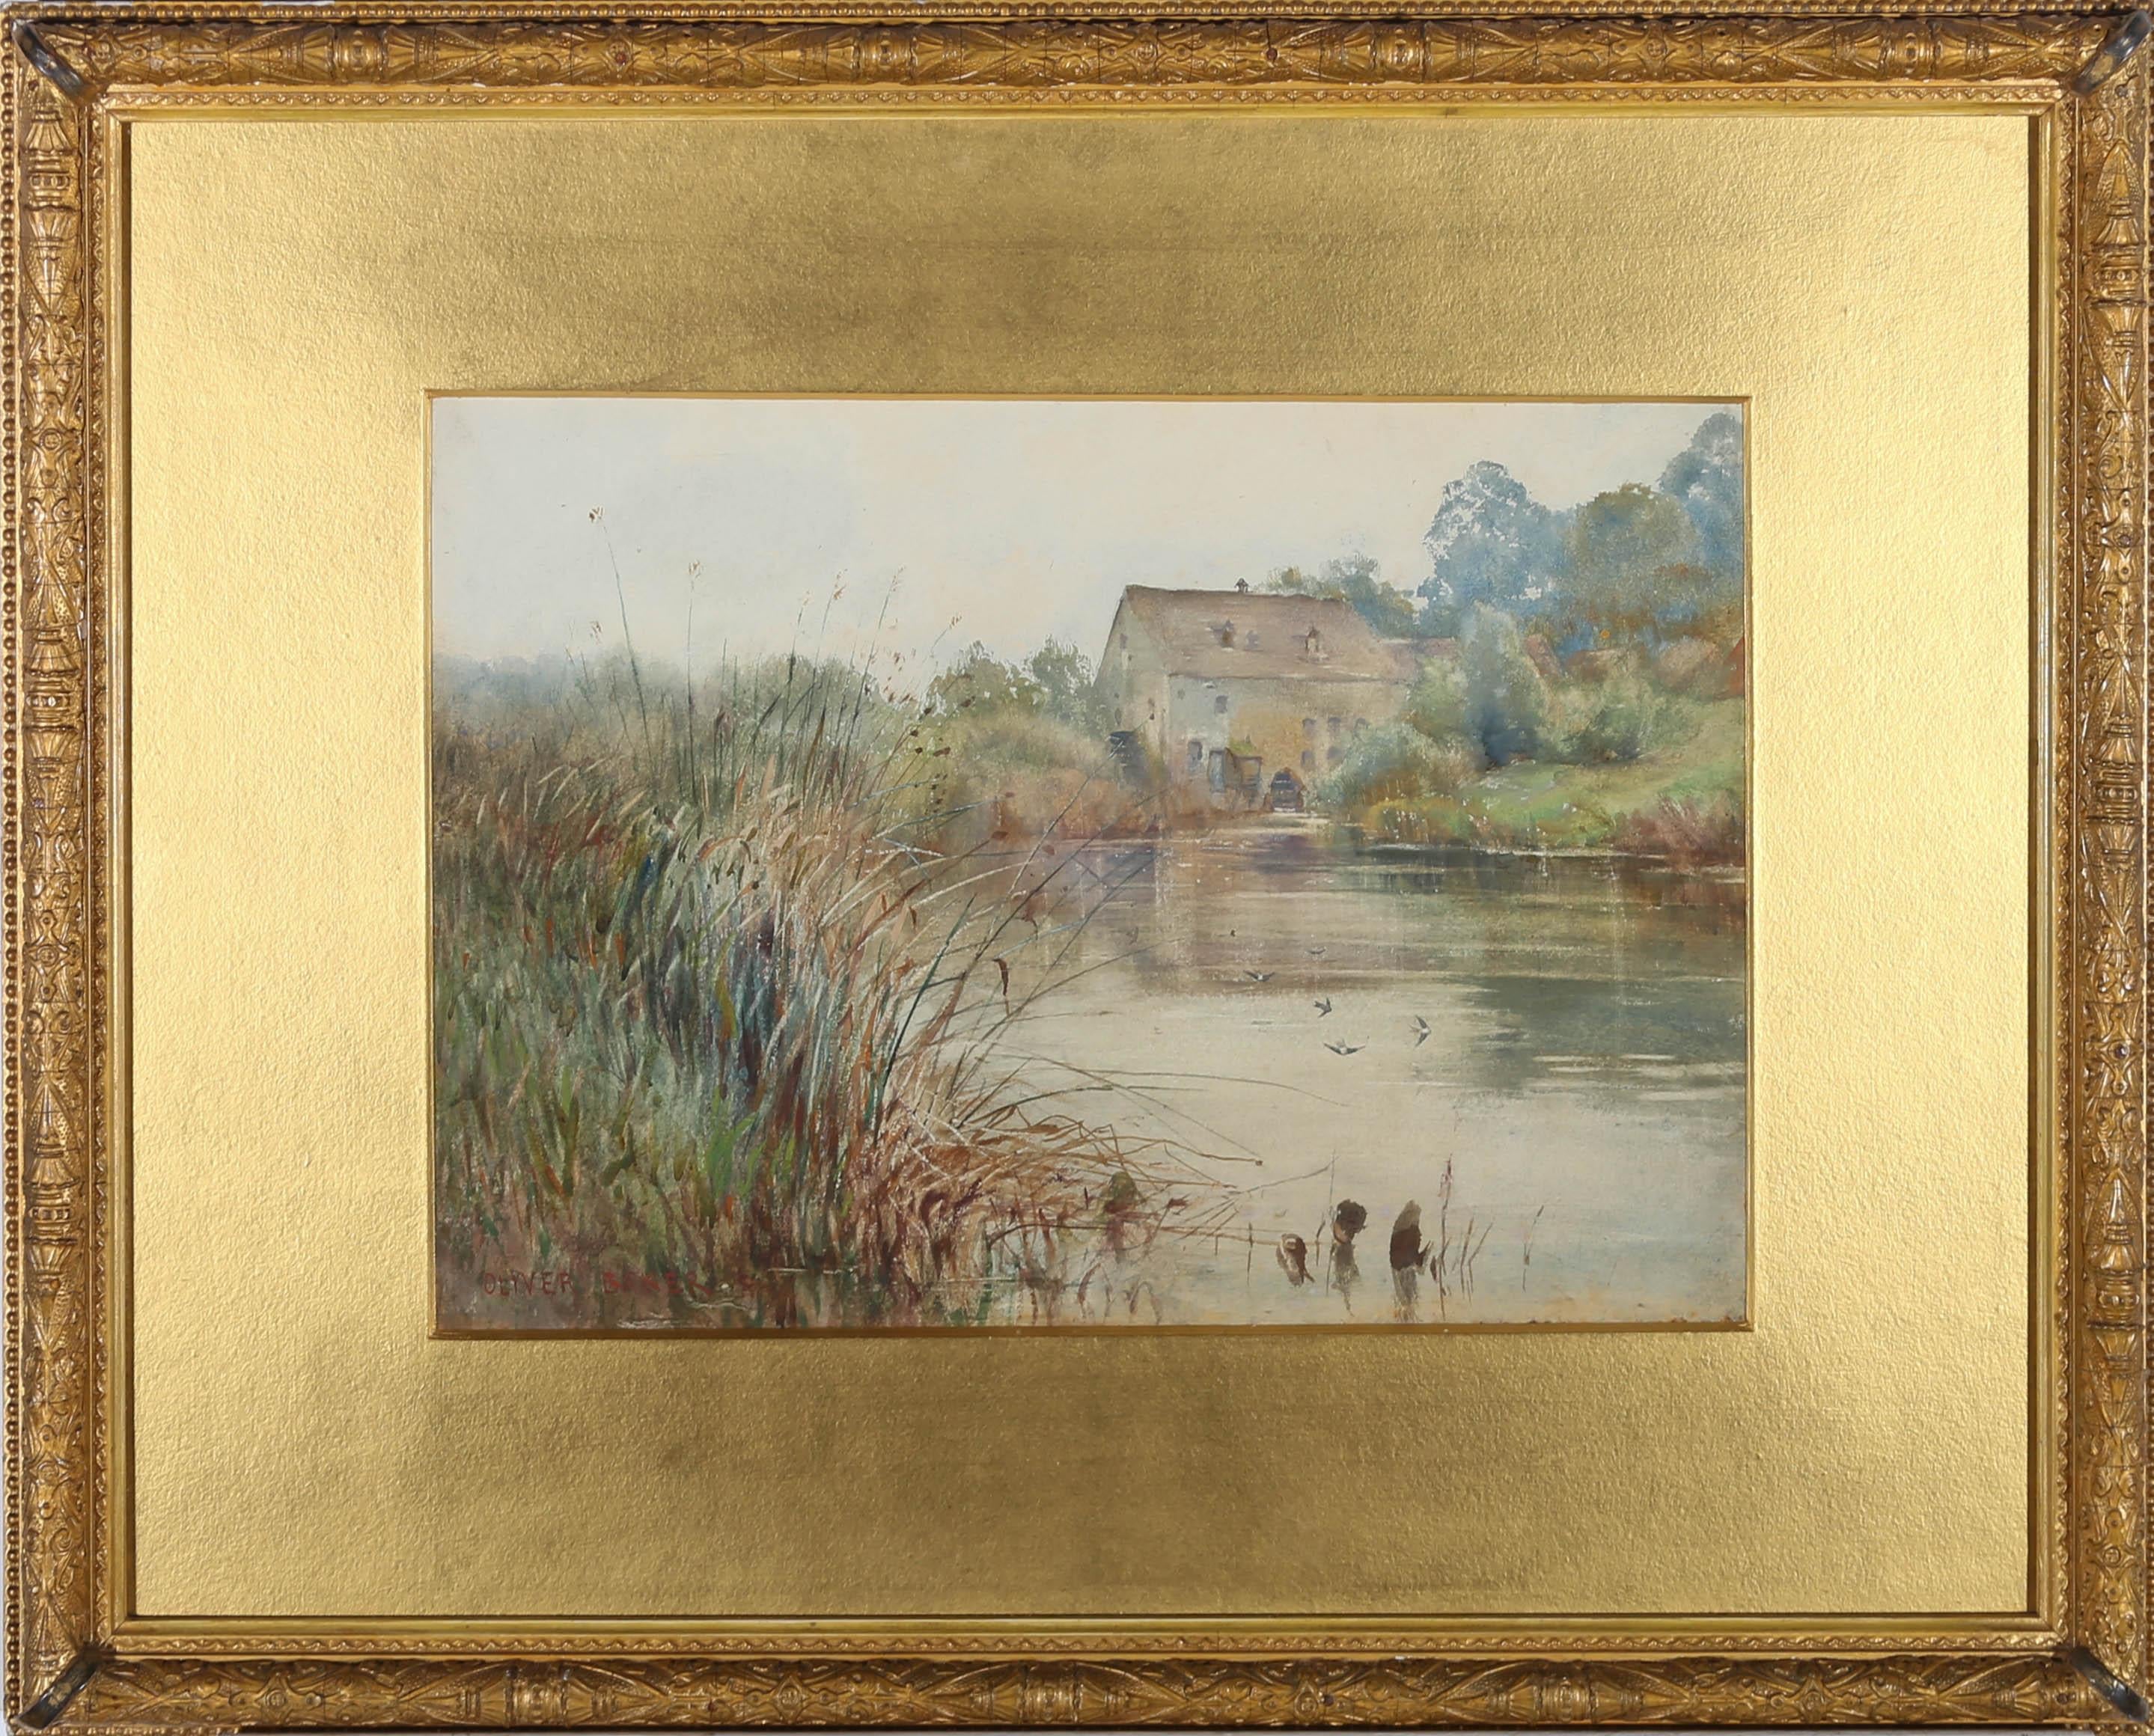 An idyllic river scene in watercolour from the late 19th Century/early 20th Century, showing a river bank with reeds and the river winding off towards an old watermill in the distance. Swallows fly low over the water and the glassy surface reflects